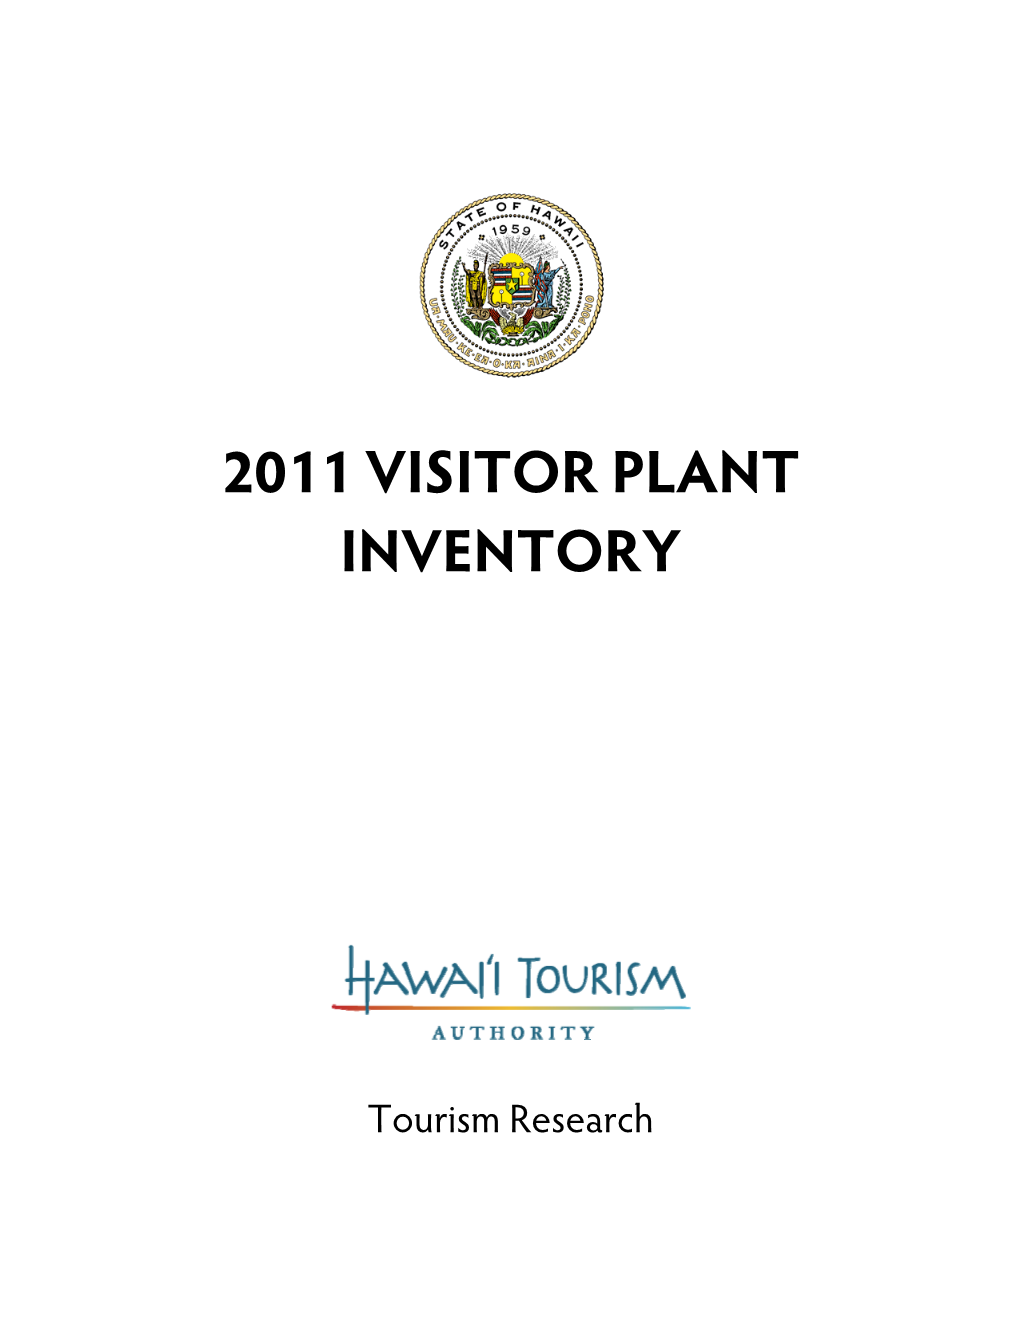 2011 Visitor Plant Inventory Report Is Posted on the HTA Website